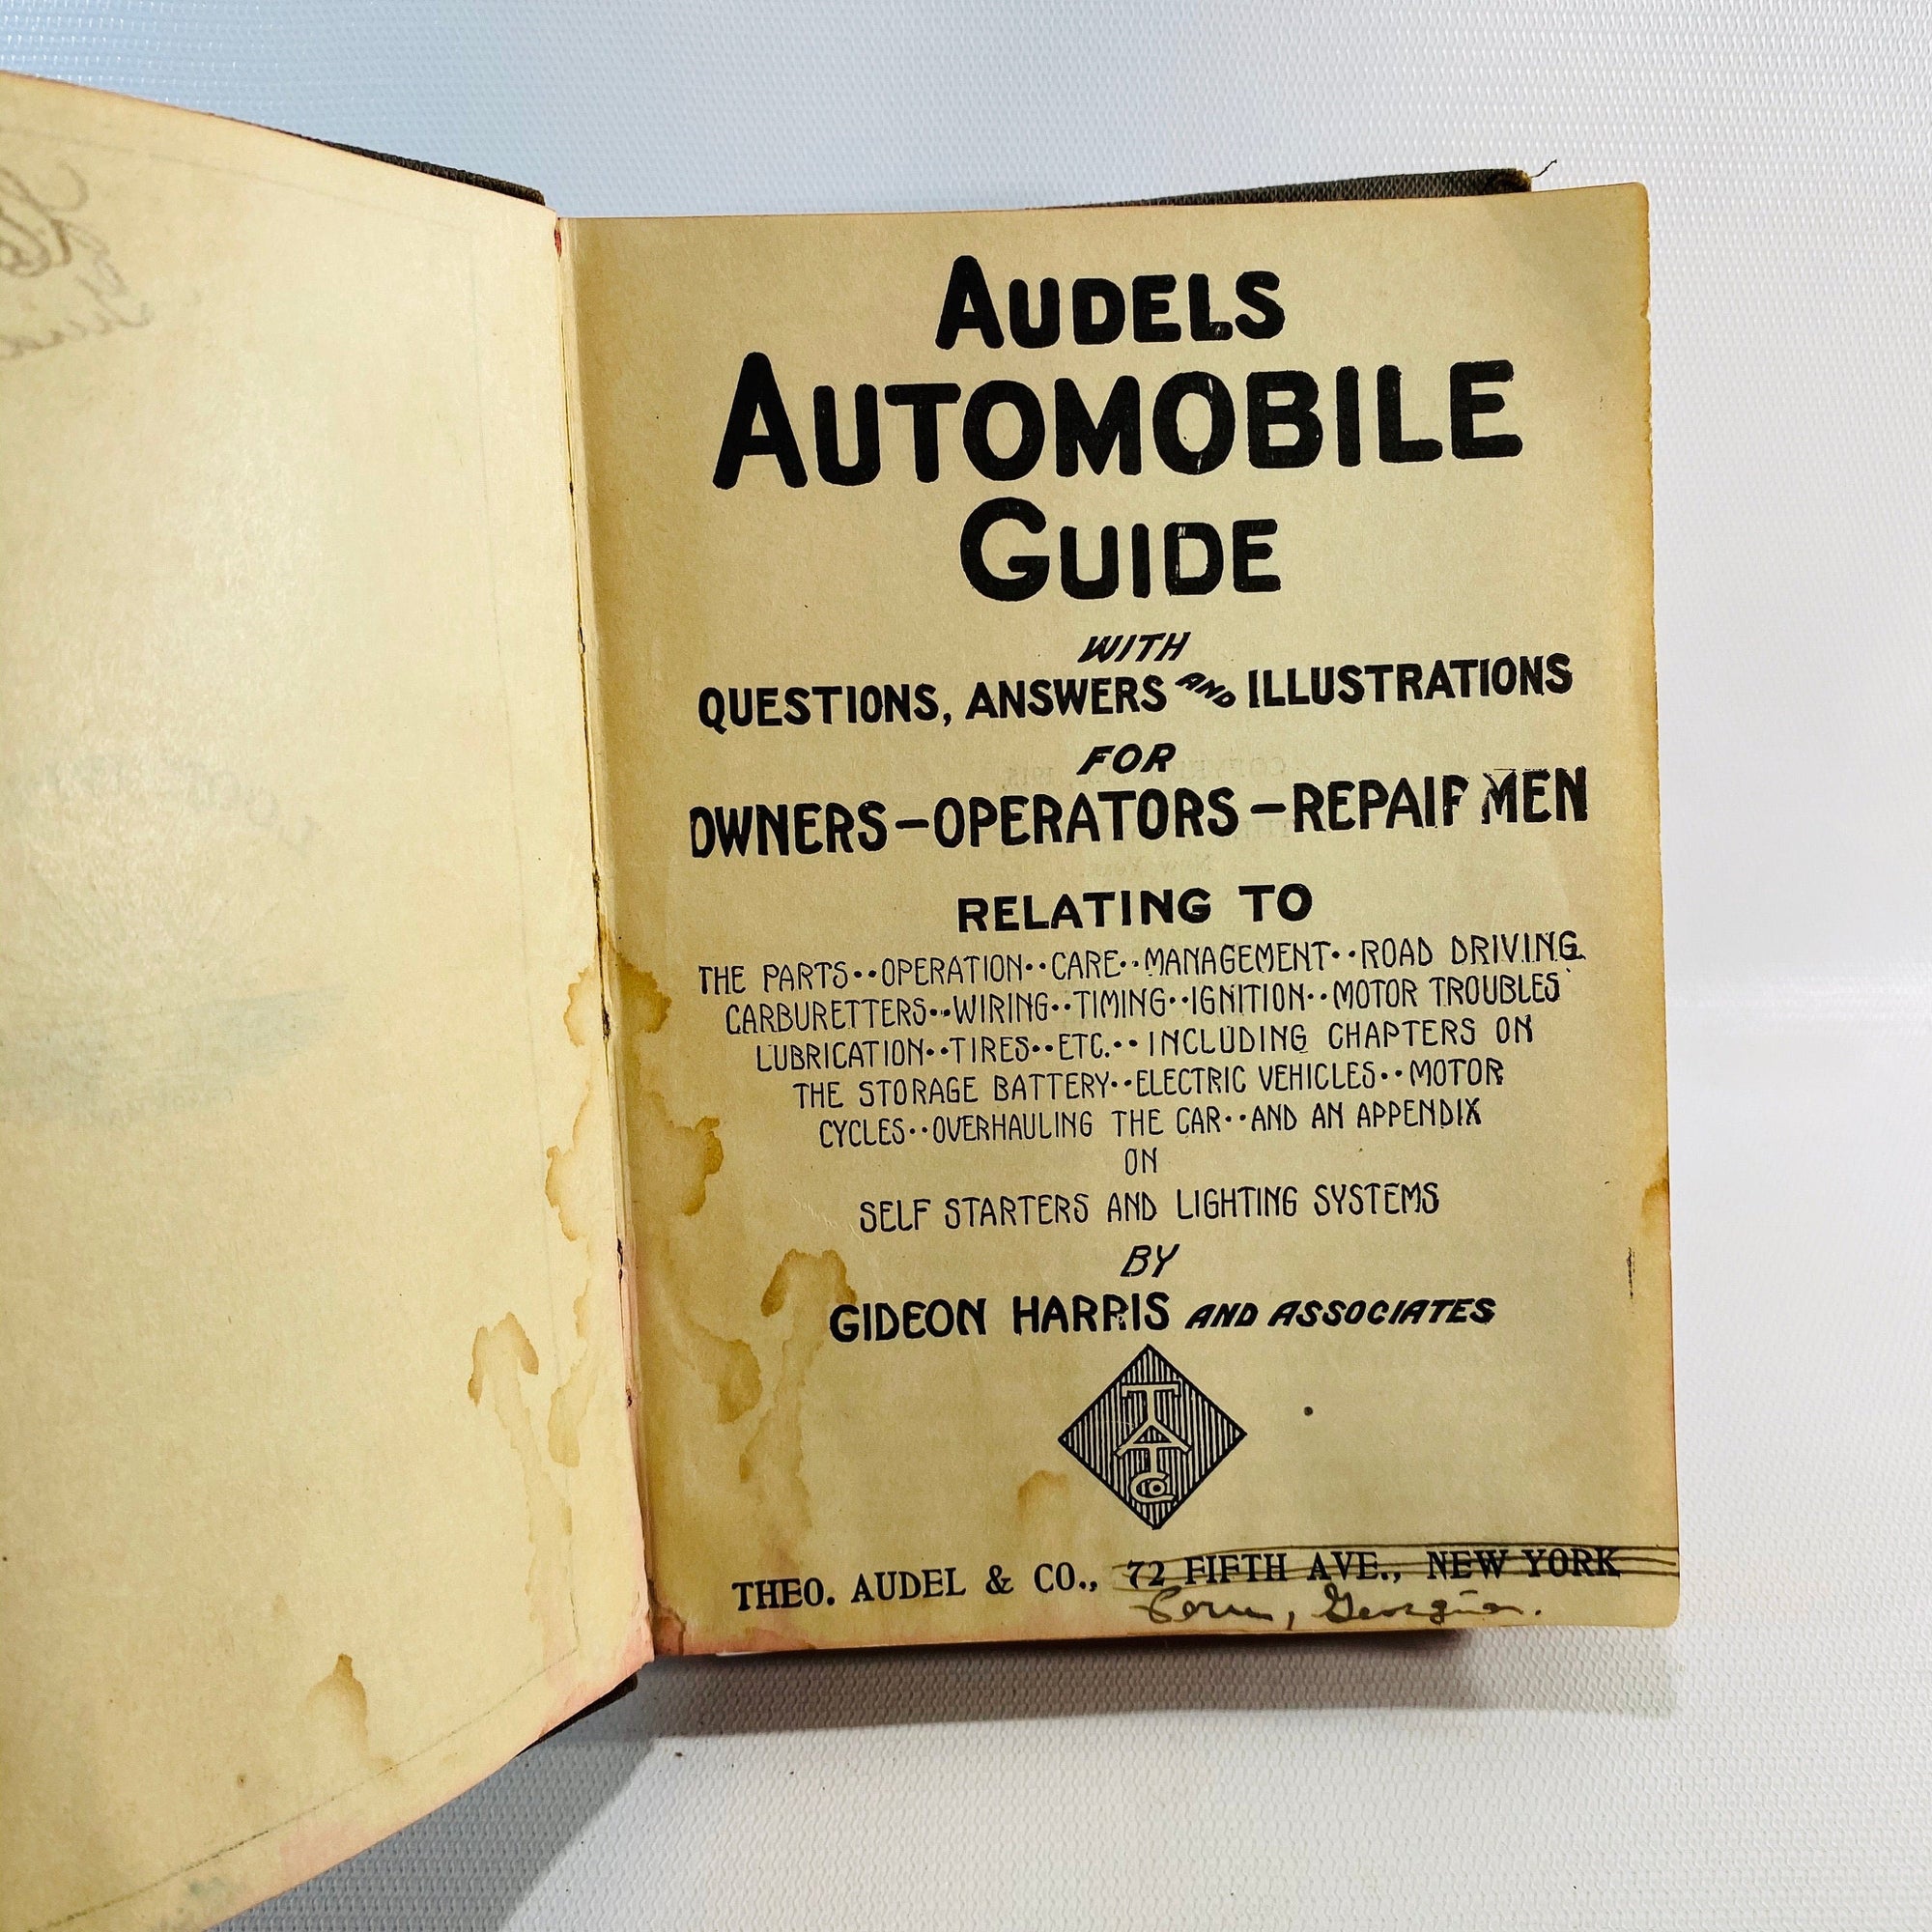 Audels Automotive Guide with Questions Answers & Illustrations by Gideon Harris 1924